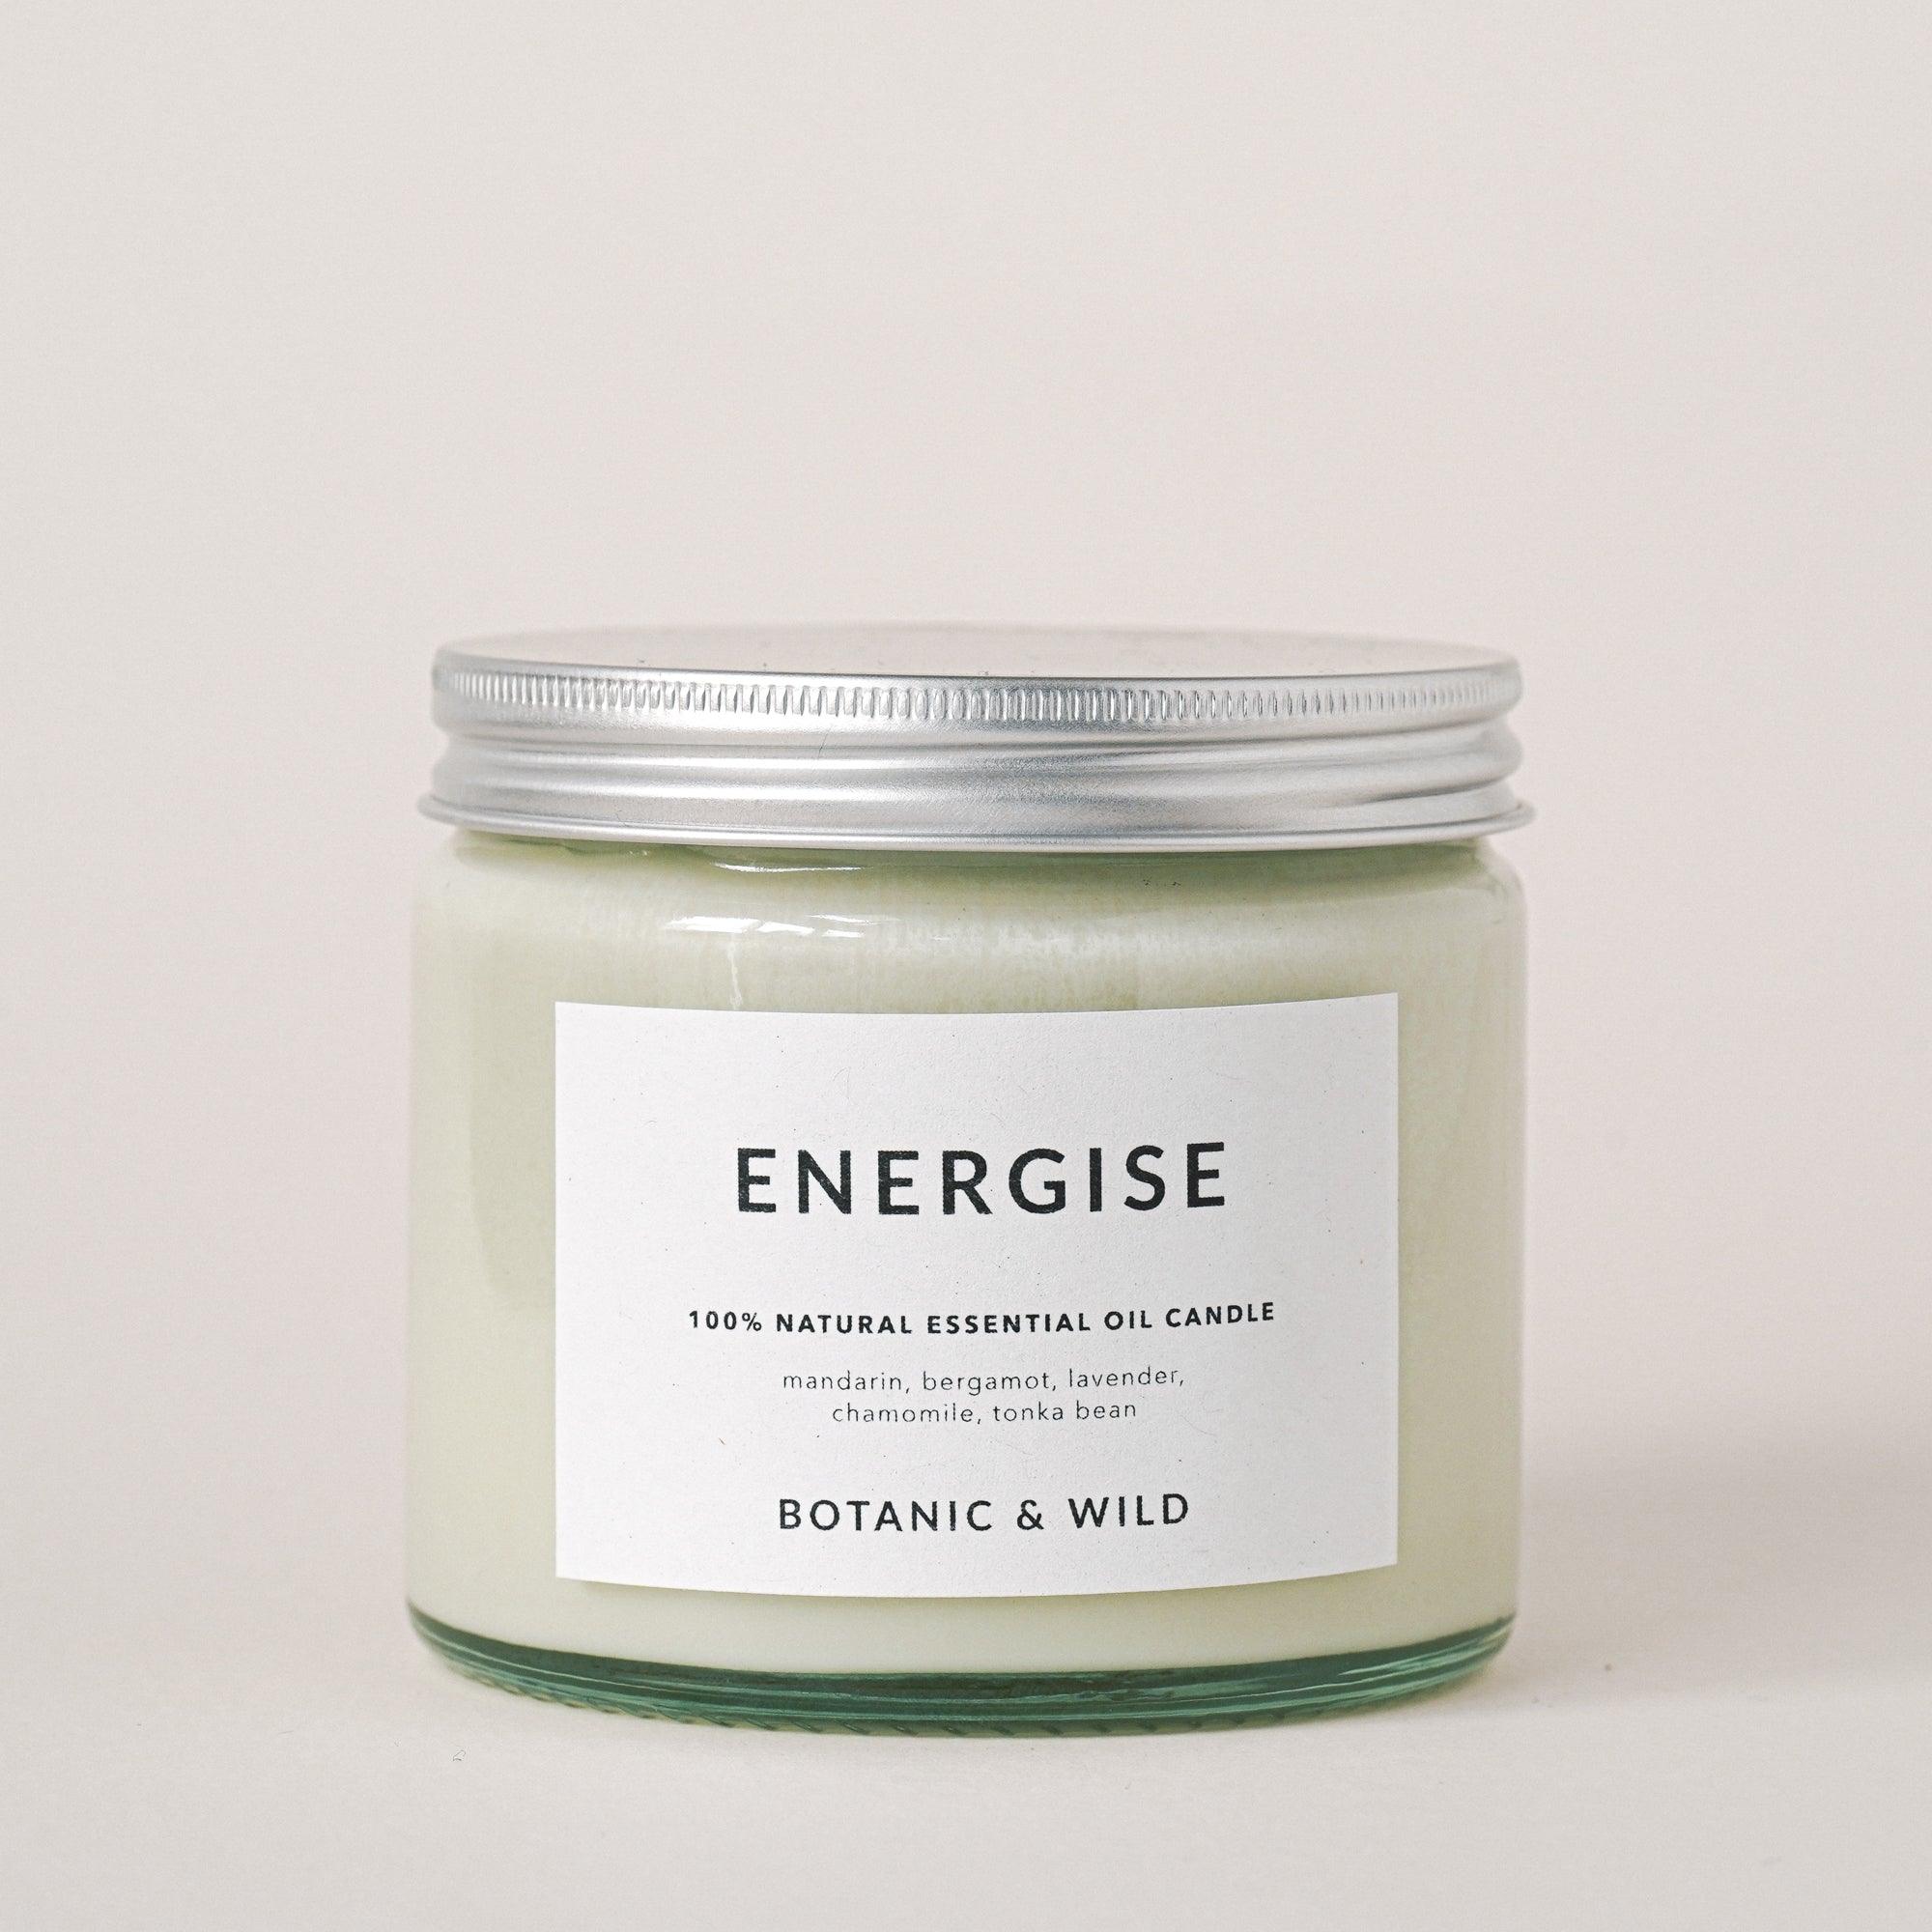 ENERGISE Essential Oil Soy Candles - Botanic & Wild